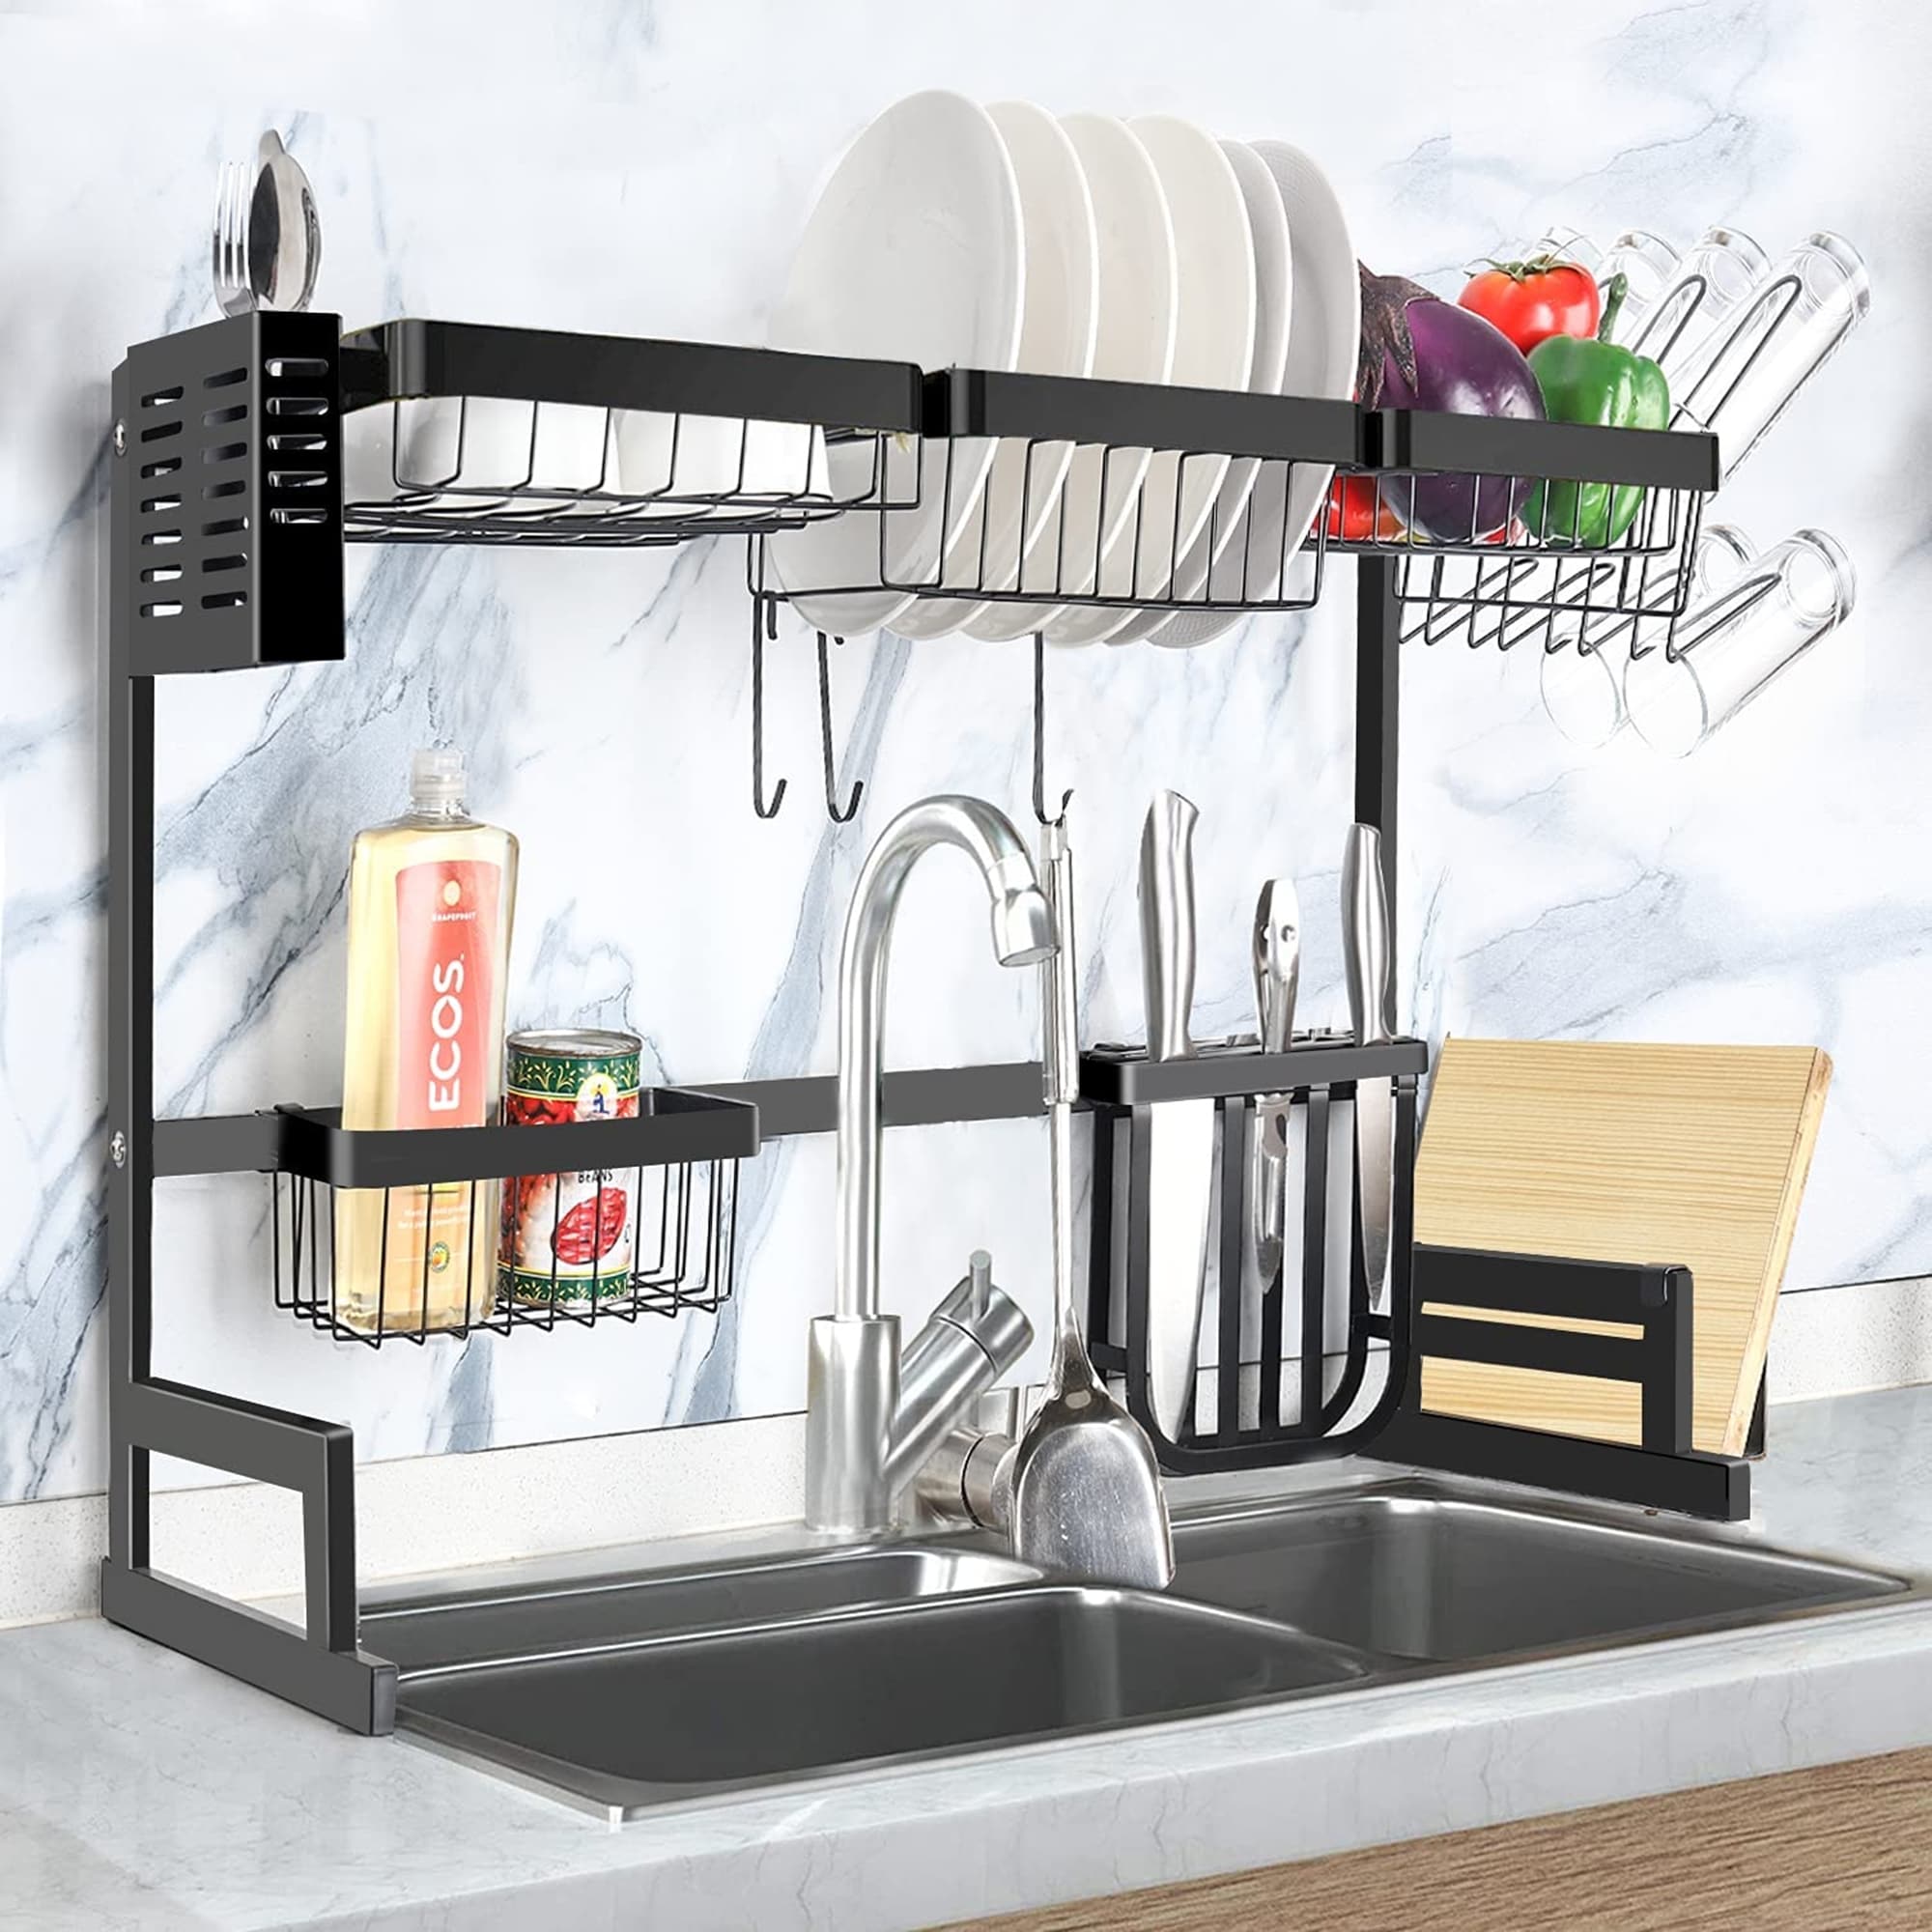  Stainless Steel Dish Drying Rack Over Kitchen Sink